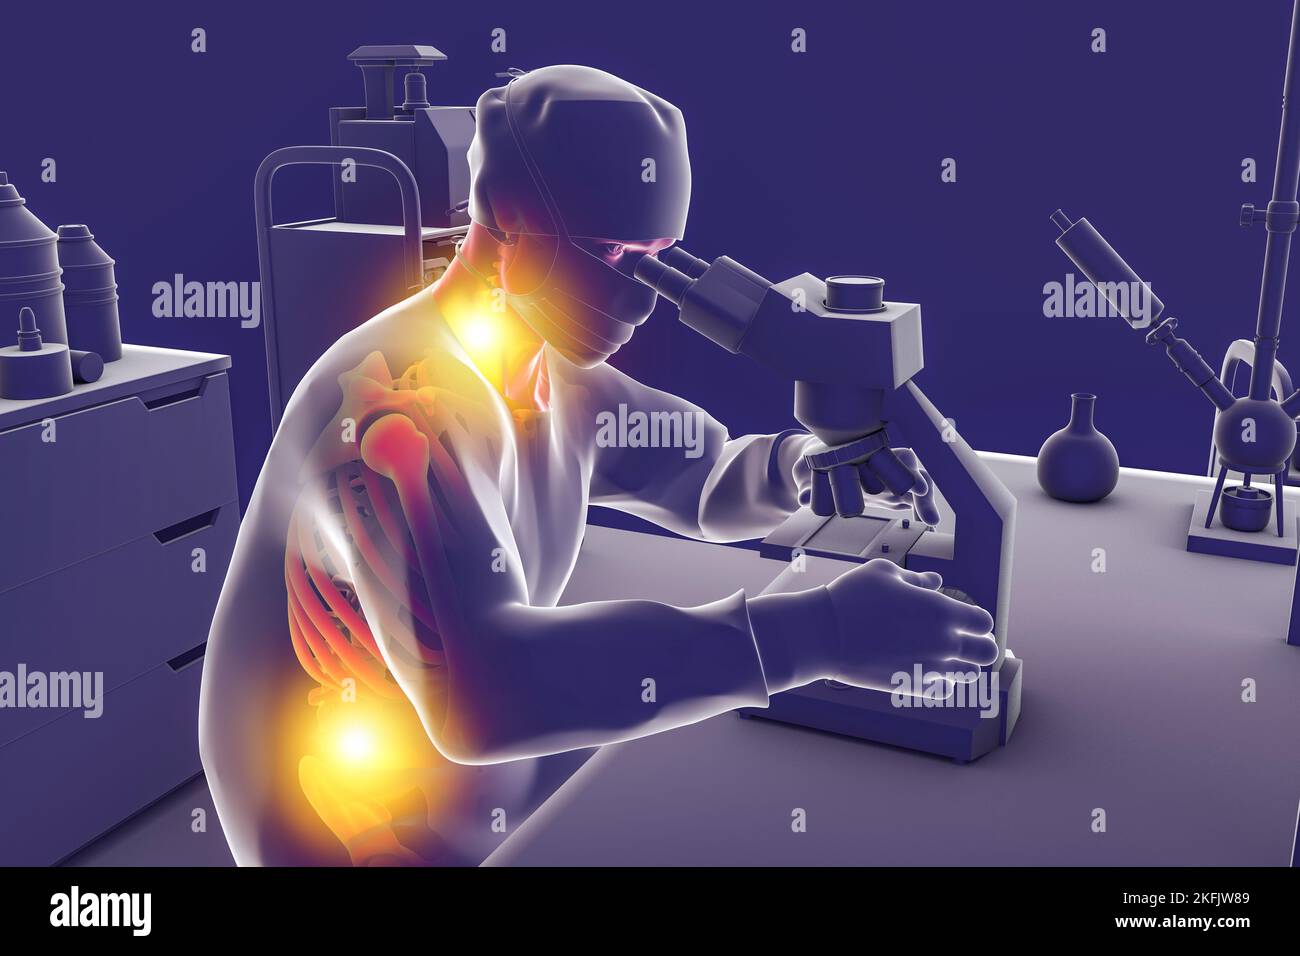 Musculoskeletal disorders in laboratory workers, illustration Stock Photo